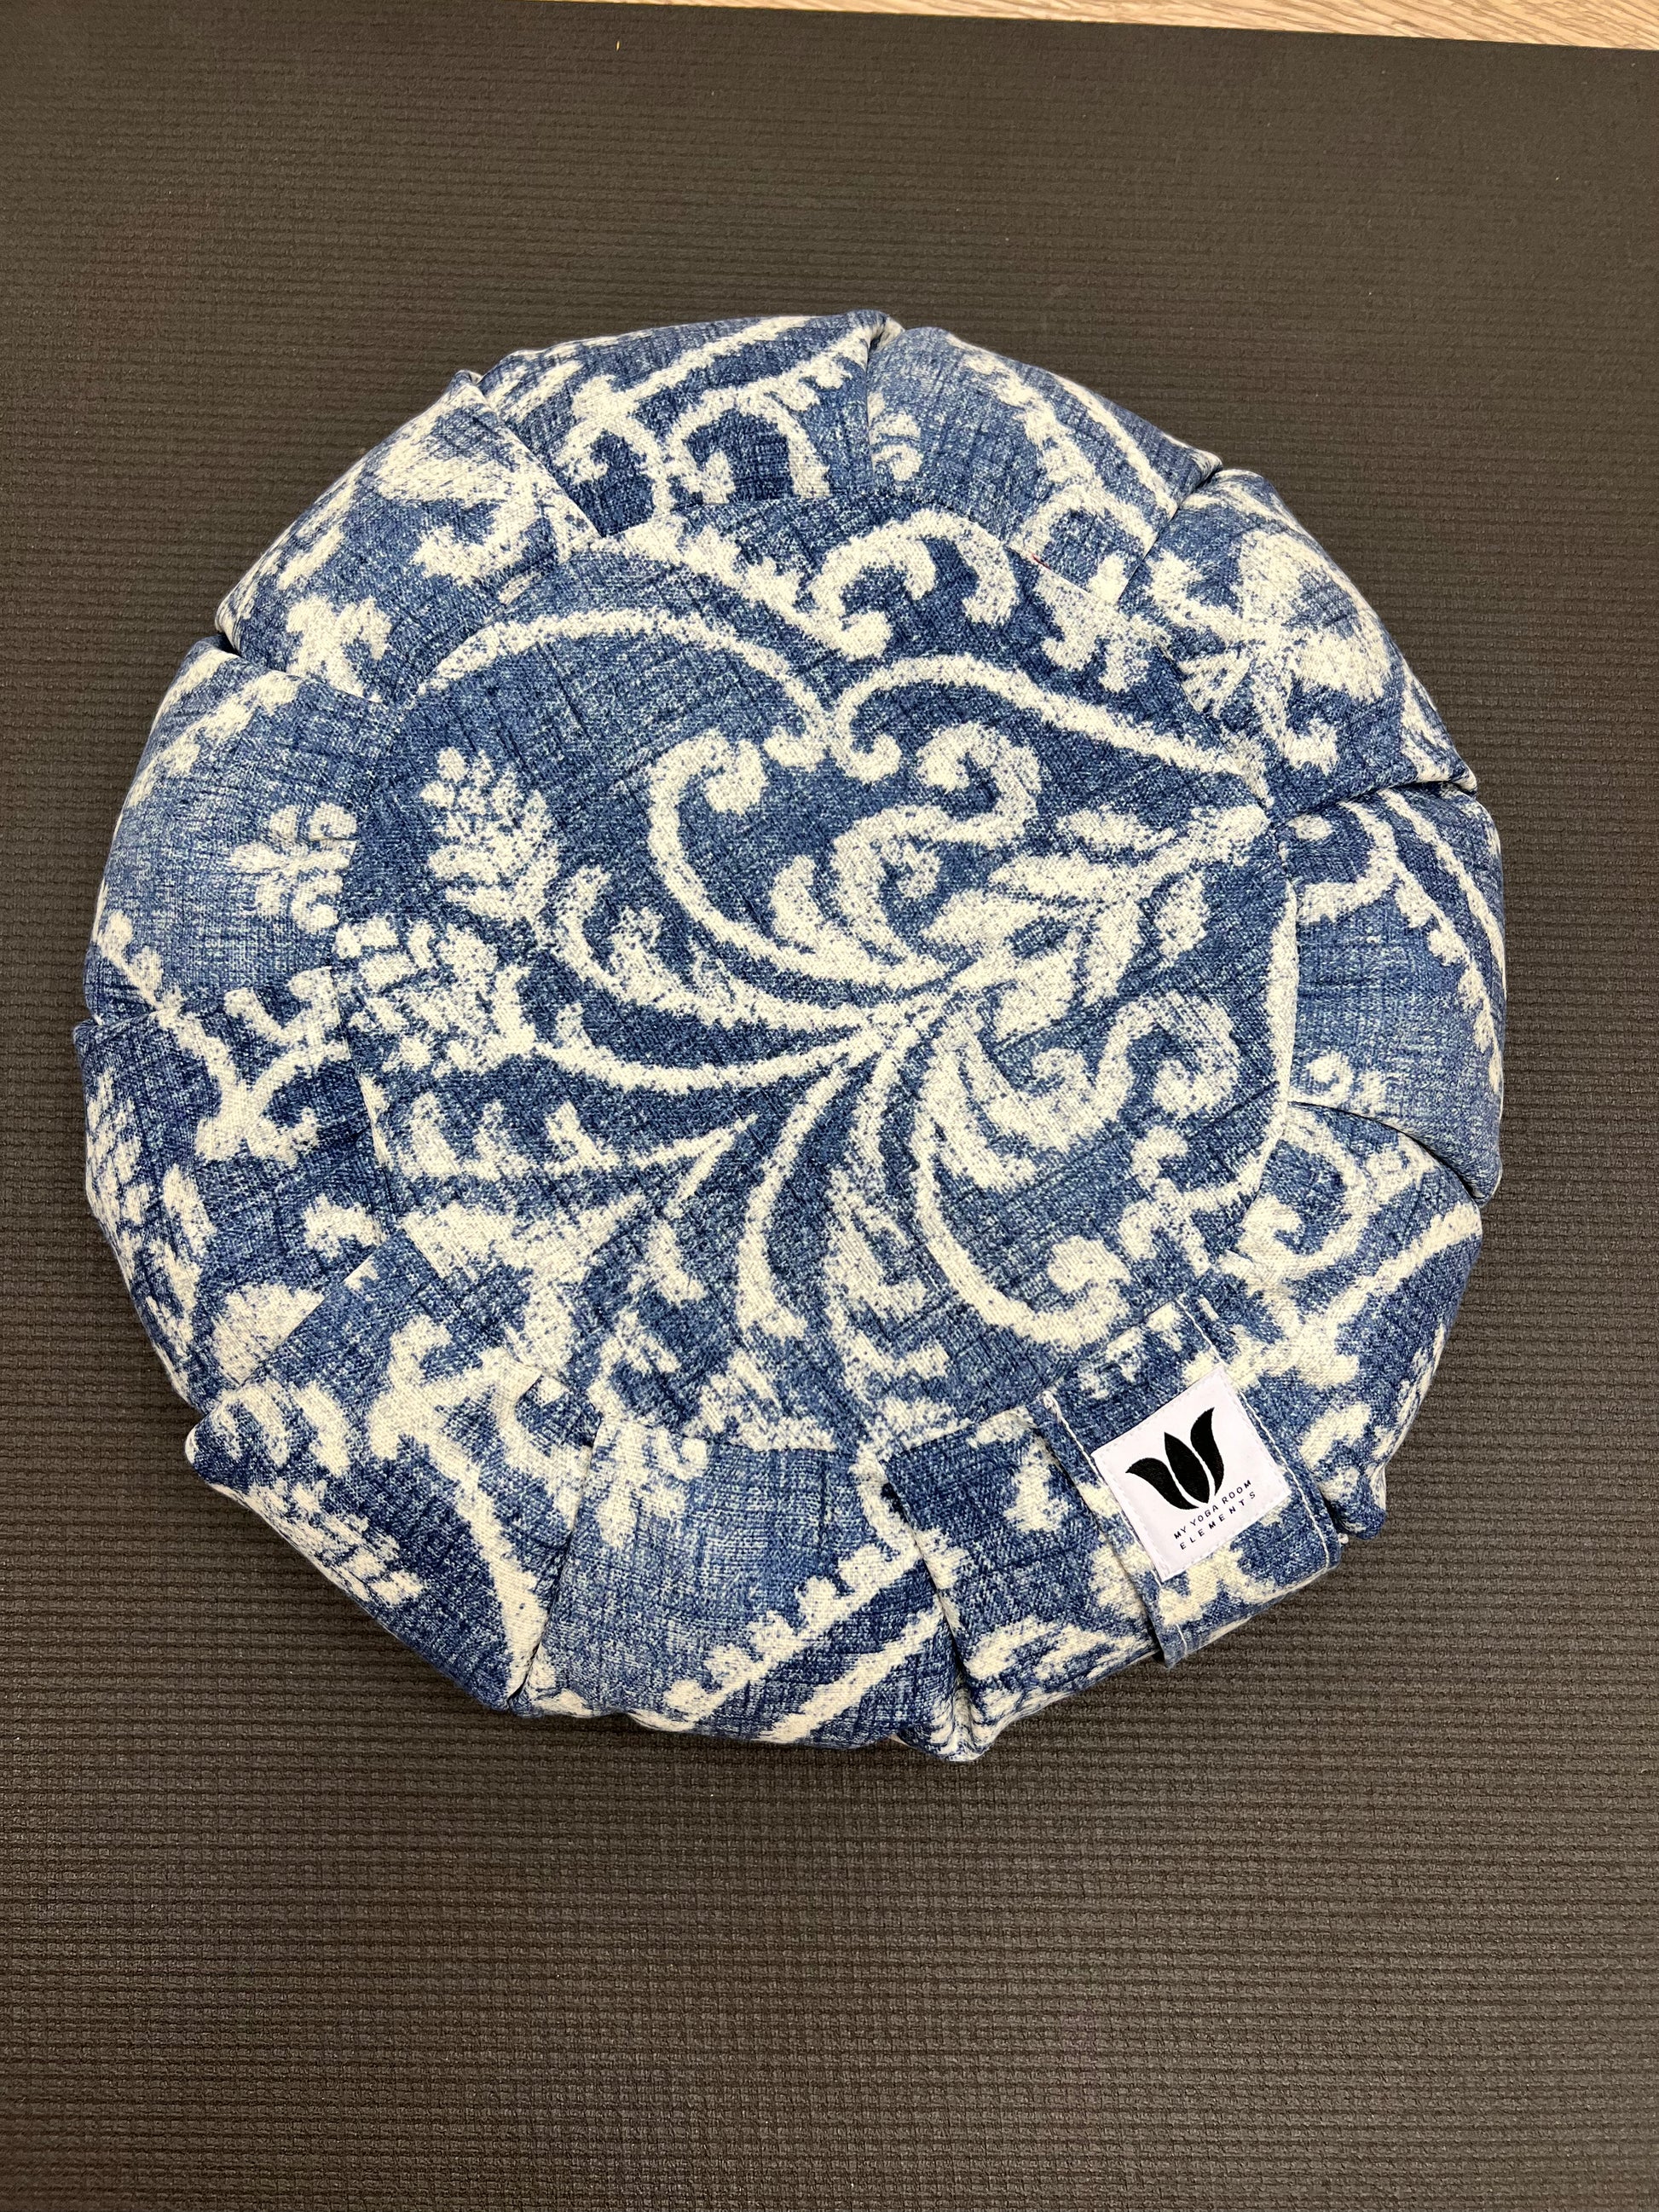 Meditation Seat Cushion in blue and white printed cotton canvas fabric, handcrafted in Canada by My Yoga Room Elements